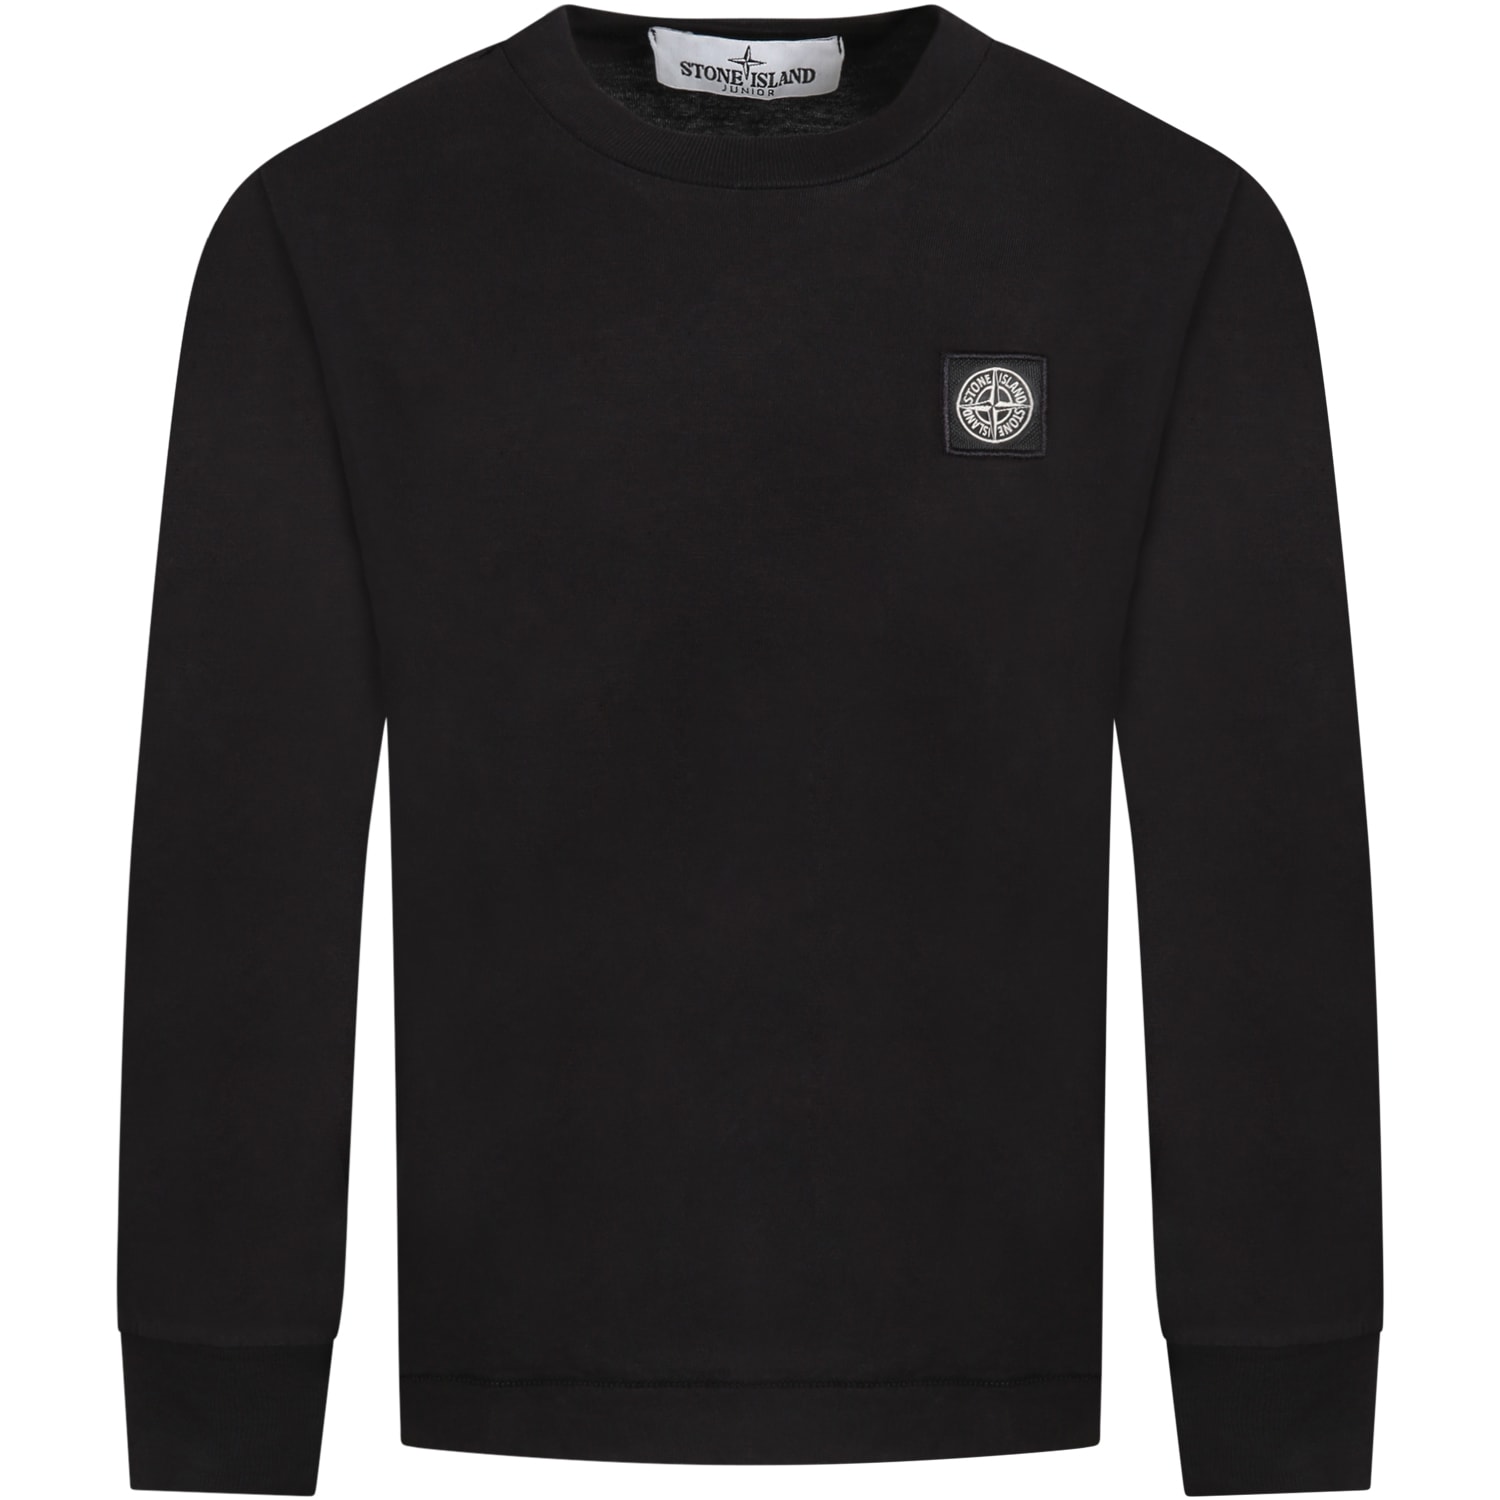 Stone Island Junior Black T-shirt Fo Boy With Iconic Compass